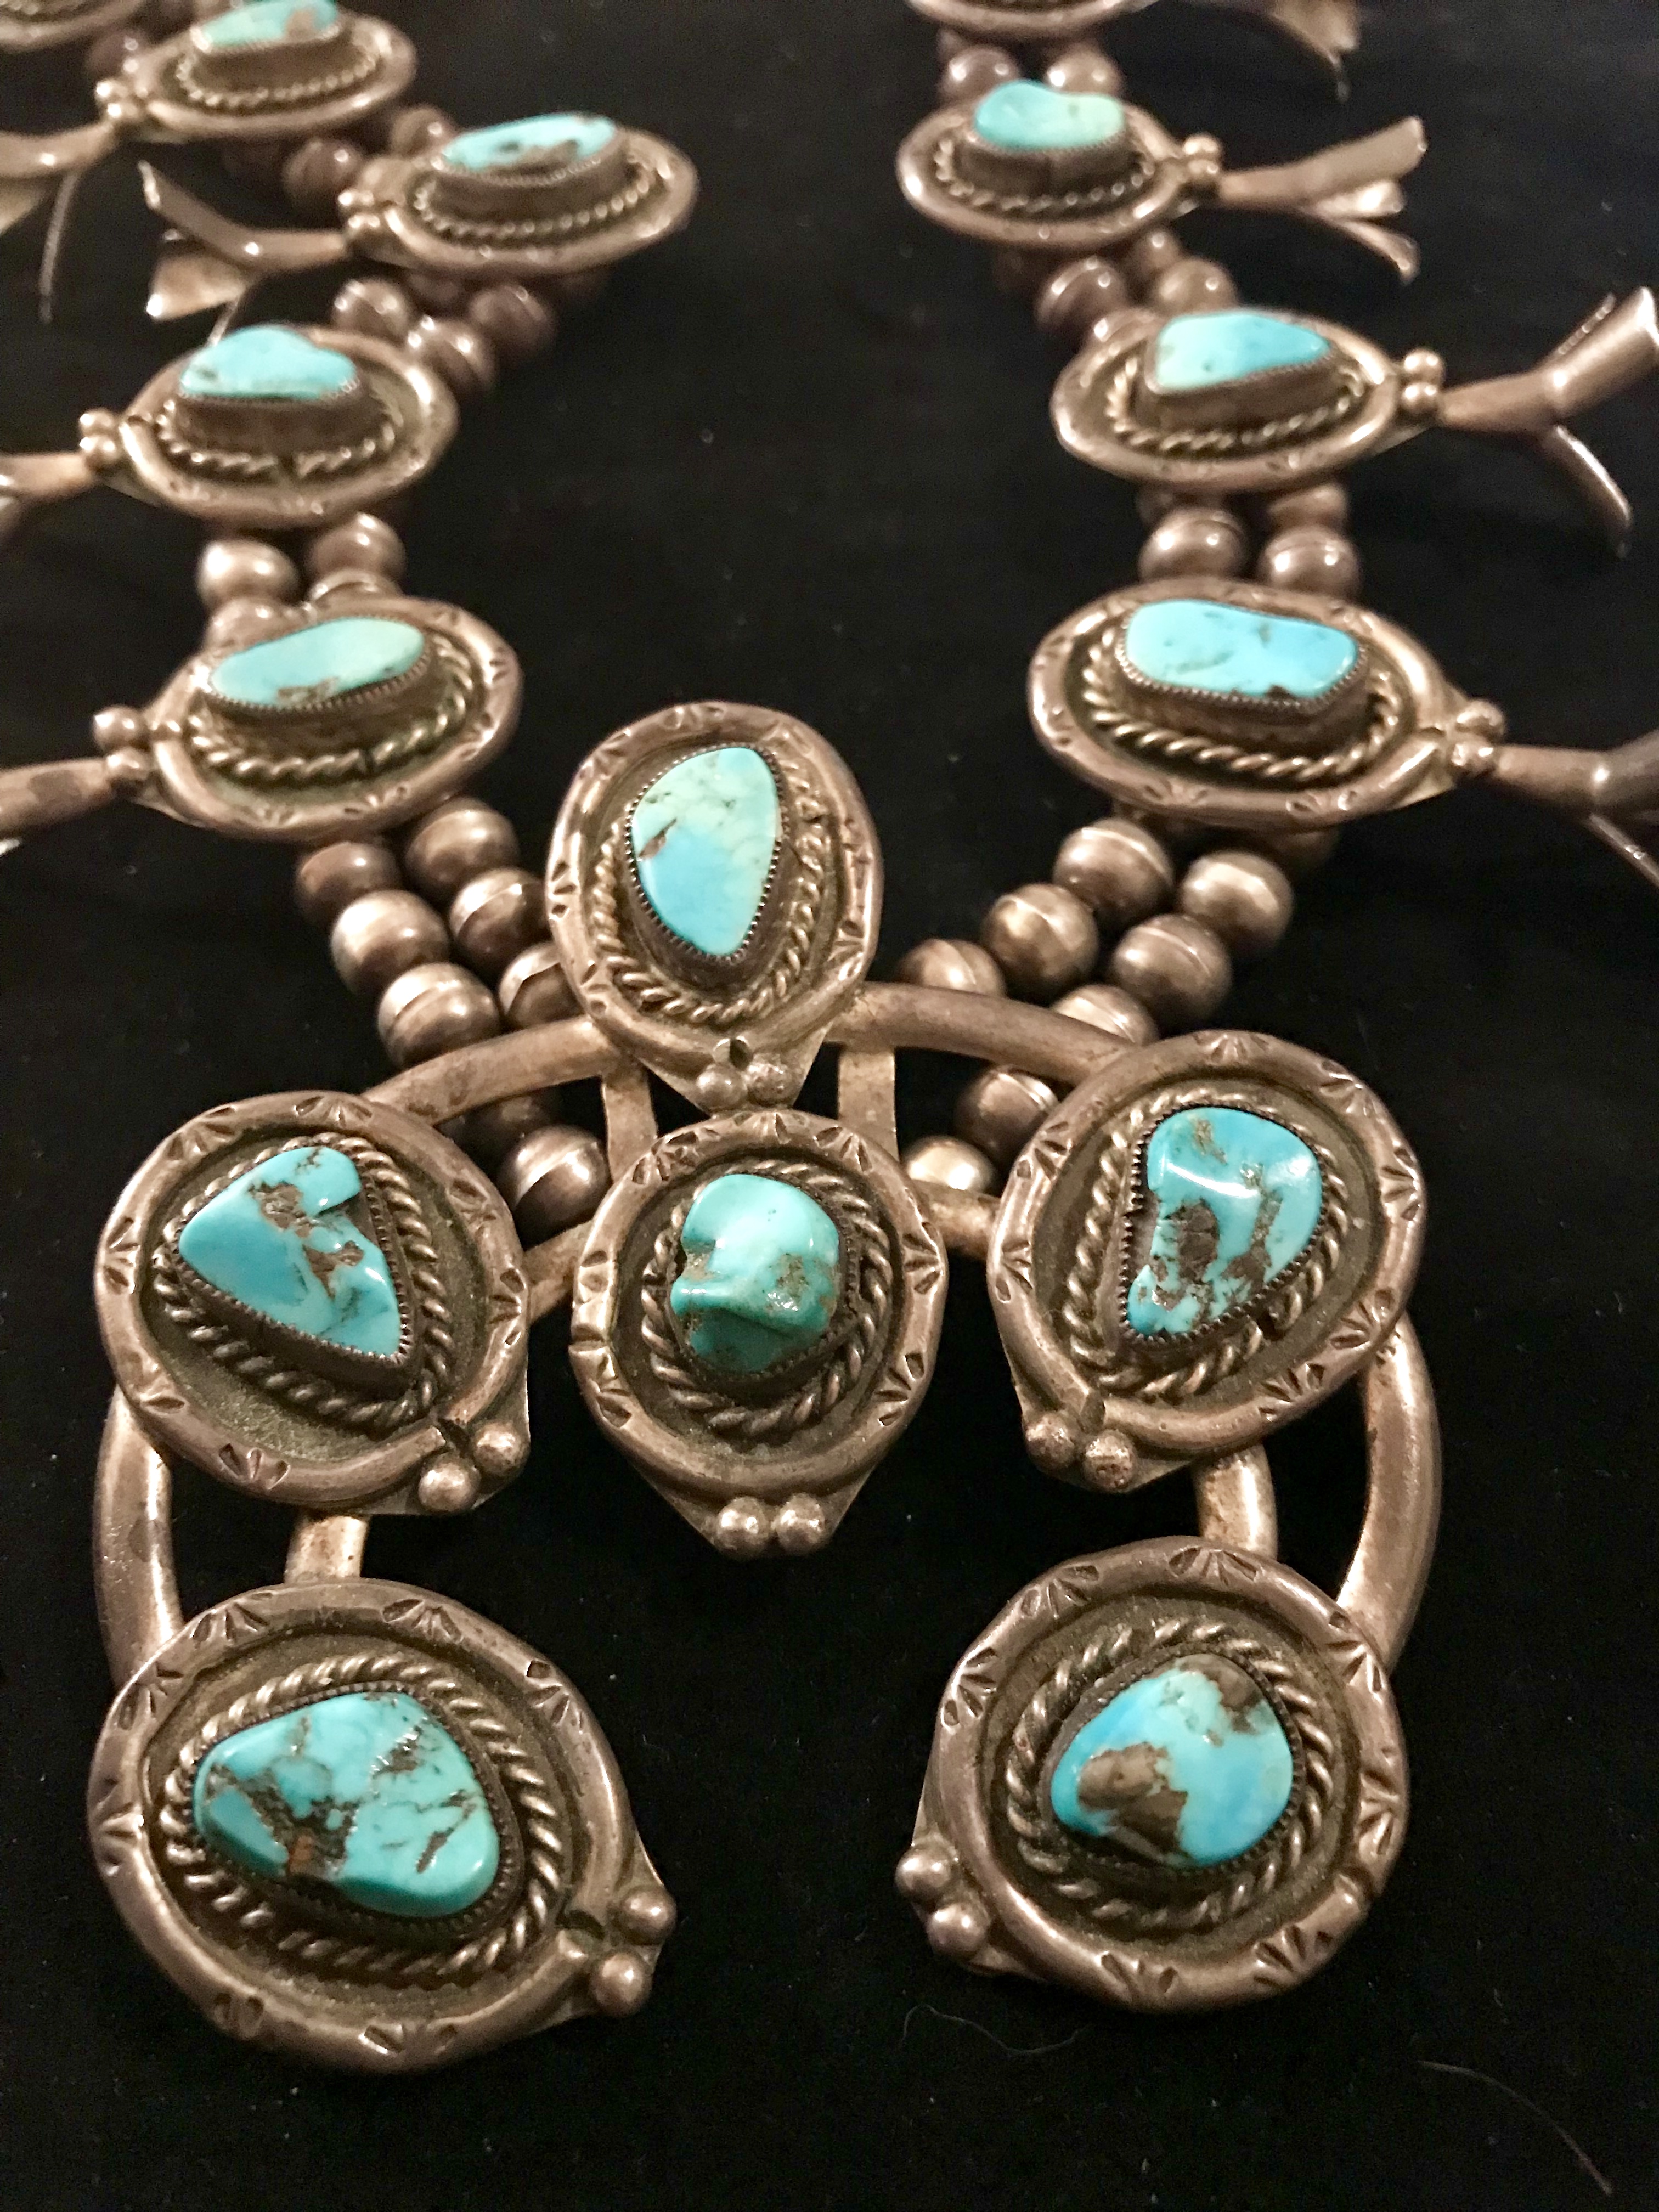 Information on antique turquoise necklace - Appraising & Evaluating ...